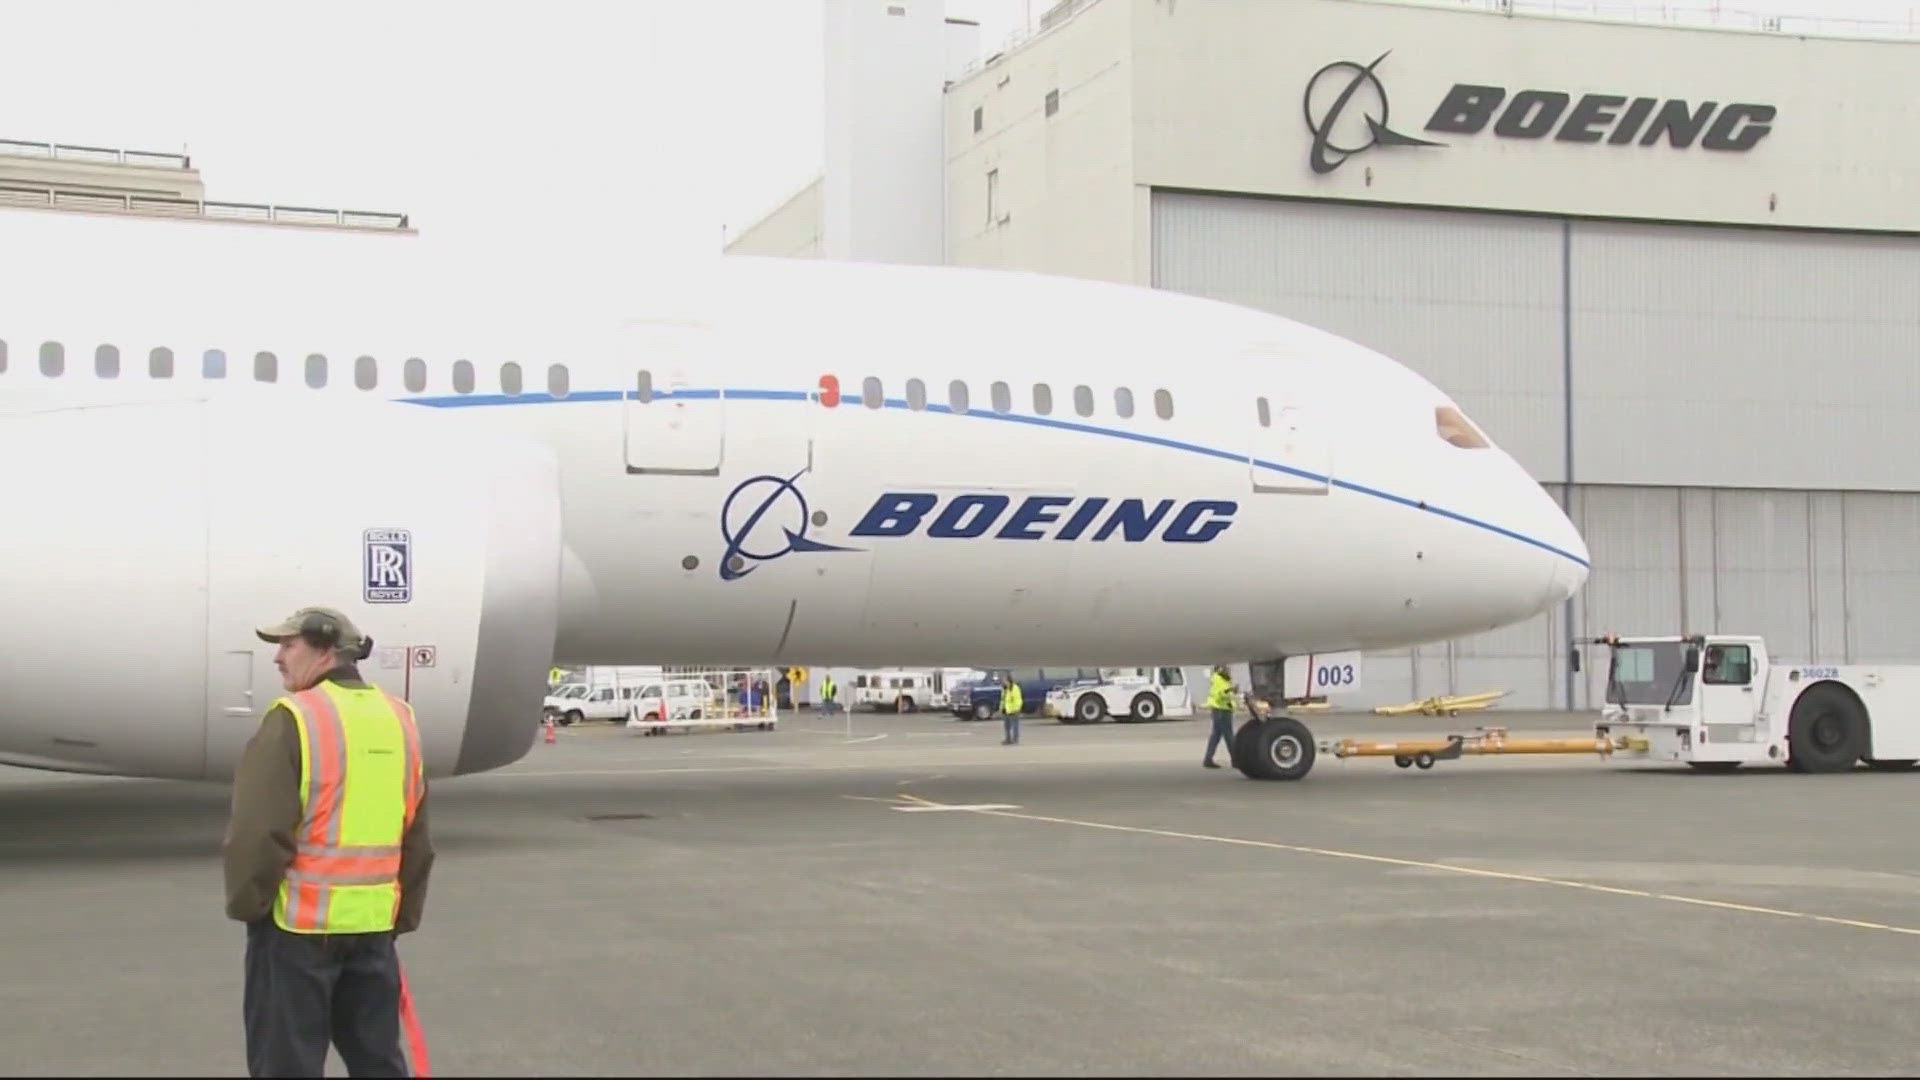 Boeing previously owned Spirit, and the purchase would reverse a longtime Boeing strategy of outsourcing key work on its passenger planes.